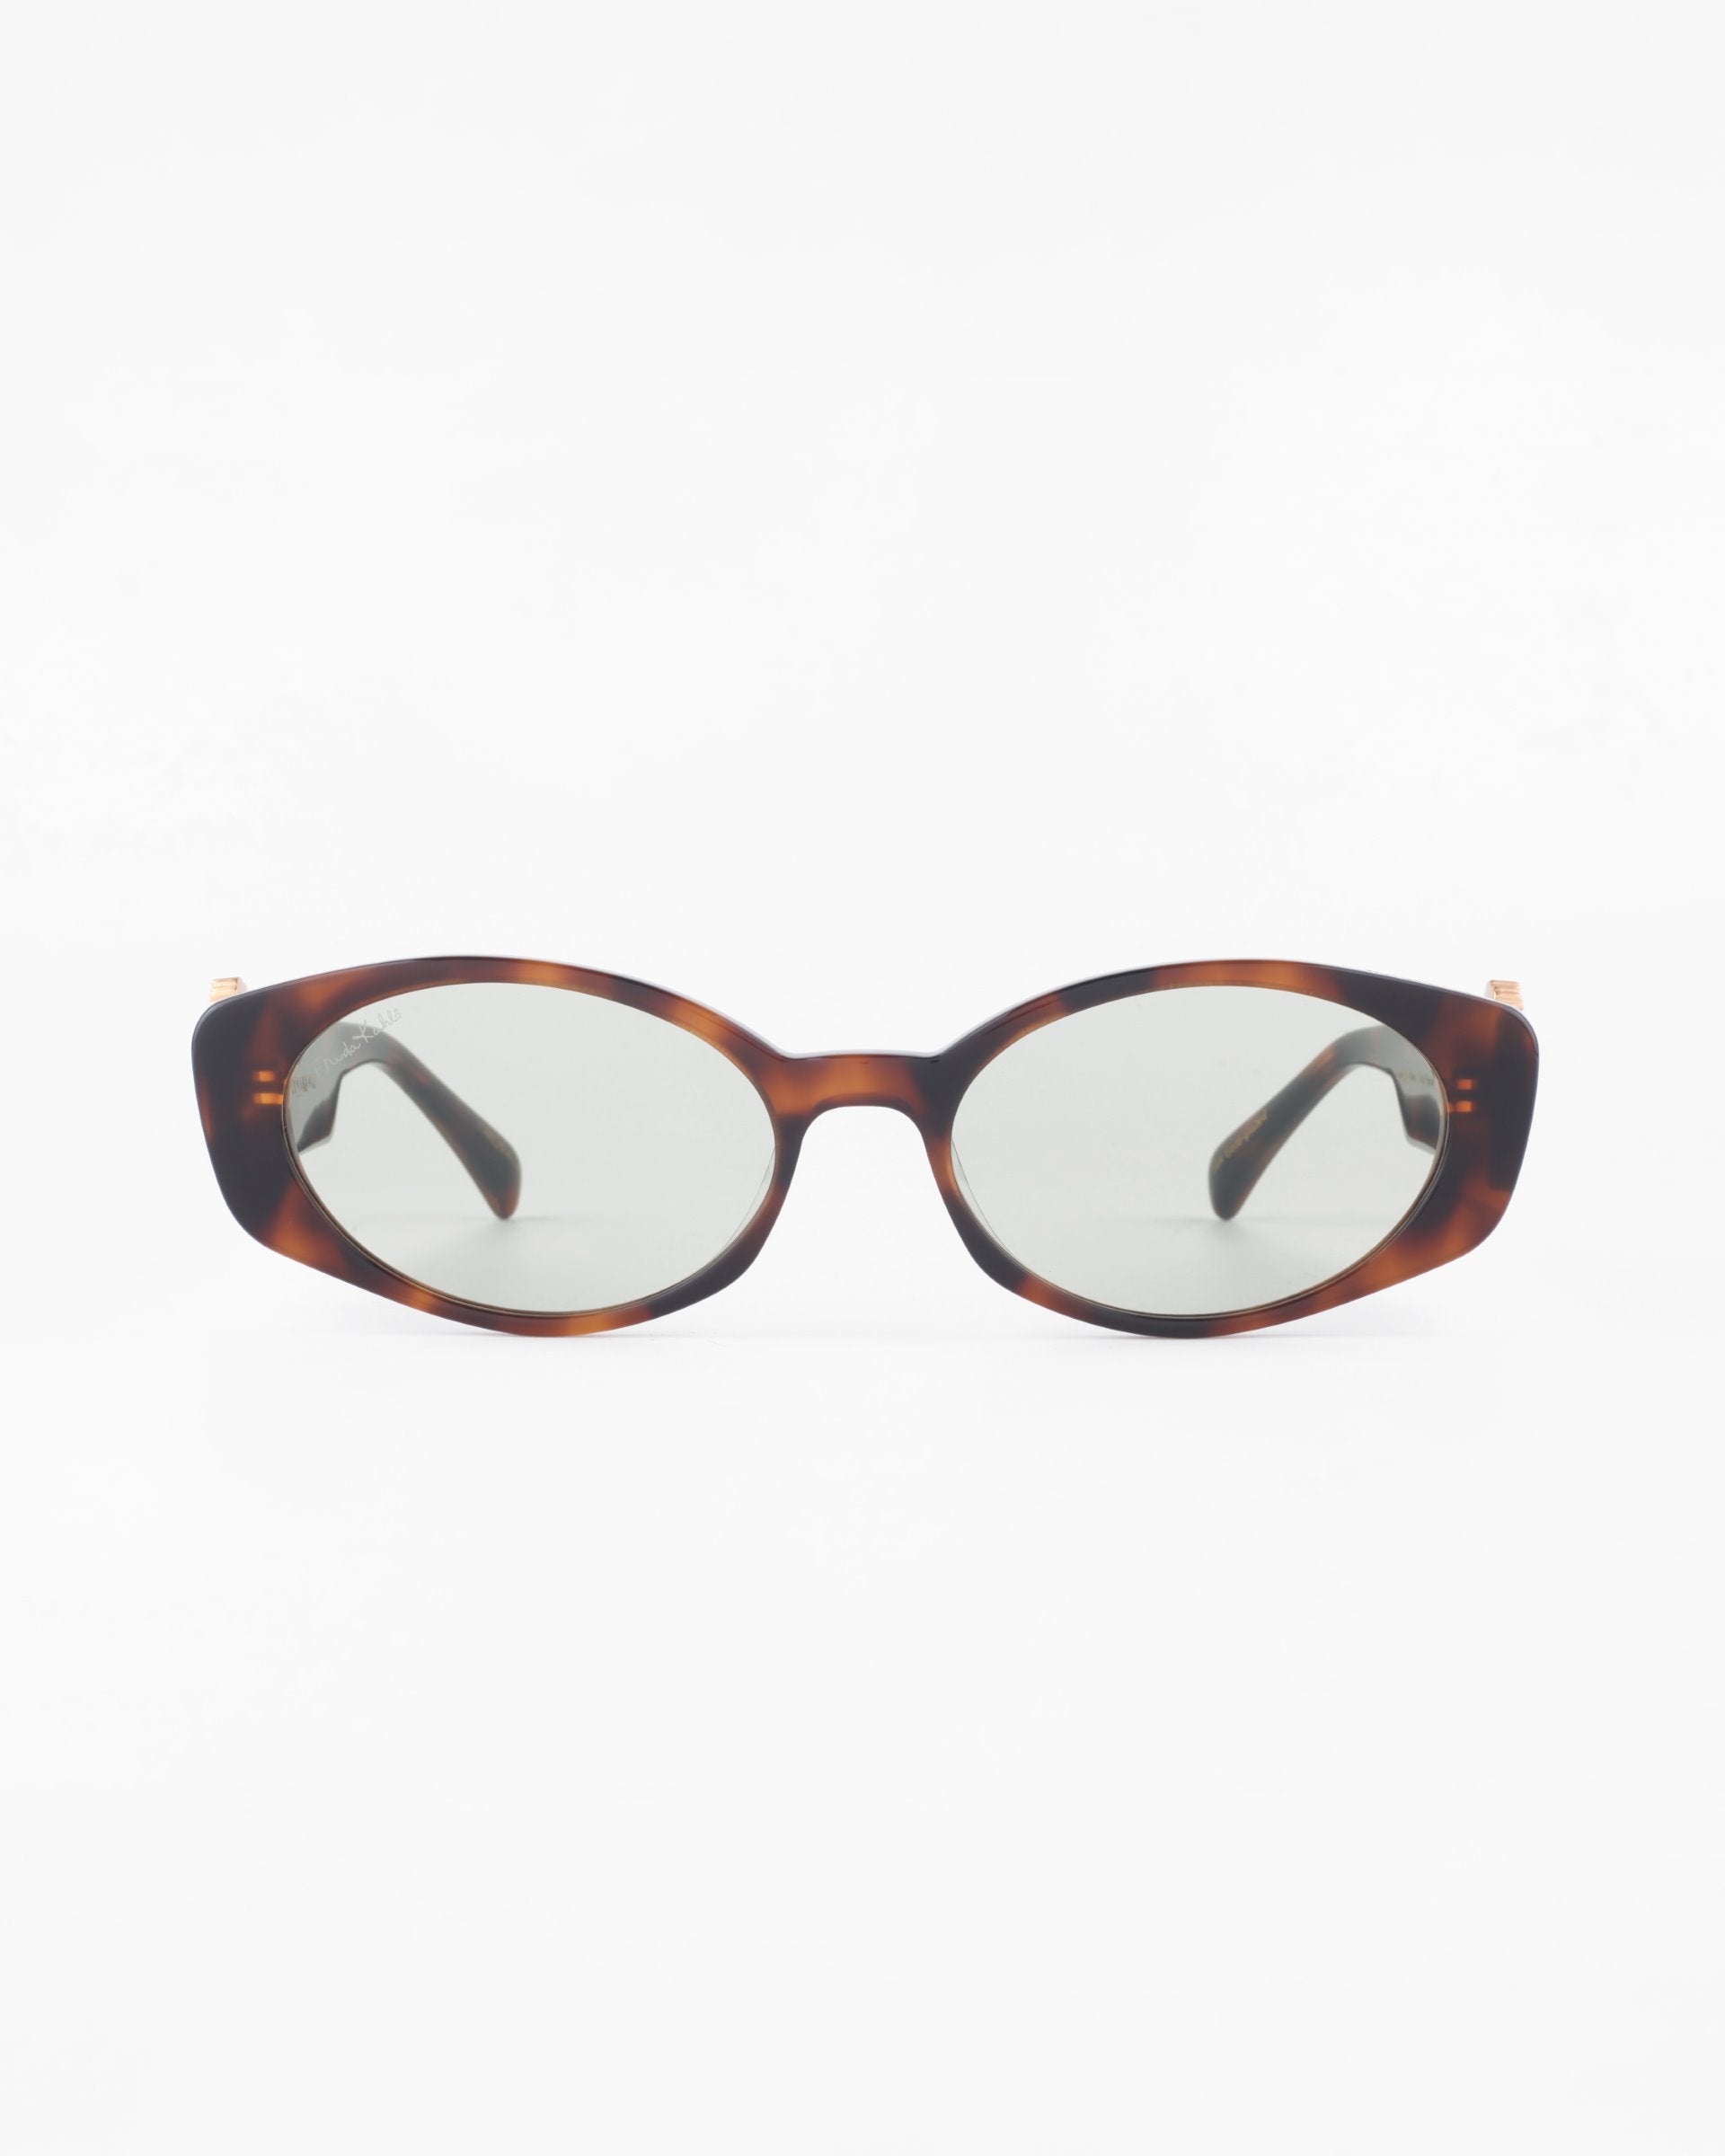 A pair of For Art&#39;s Sake® Frida Portrait sunglasses with brown tortoiseshell frames and ultra-lightweight Nylon lenses, offering 100% UVA &amp; UVB protection. The dark-tinted lenses complement the frames and are positioned facing forward against a plain white background.